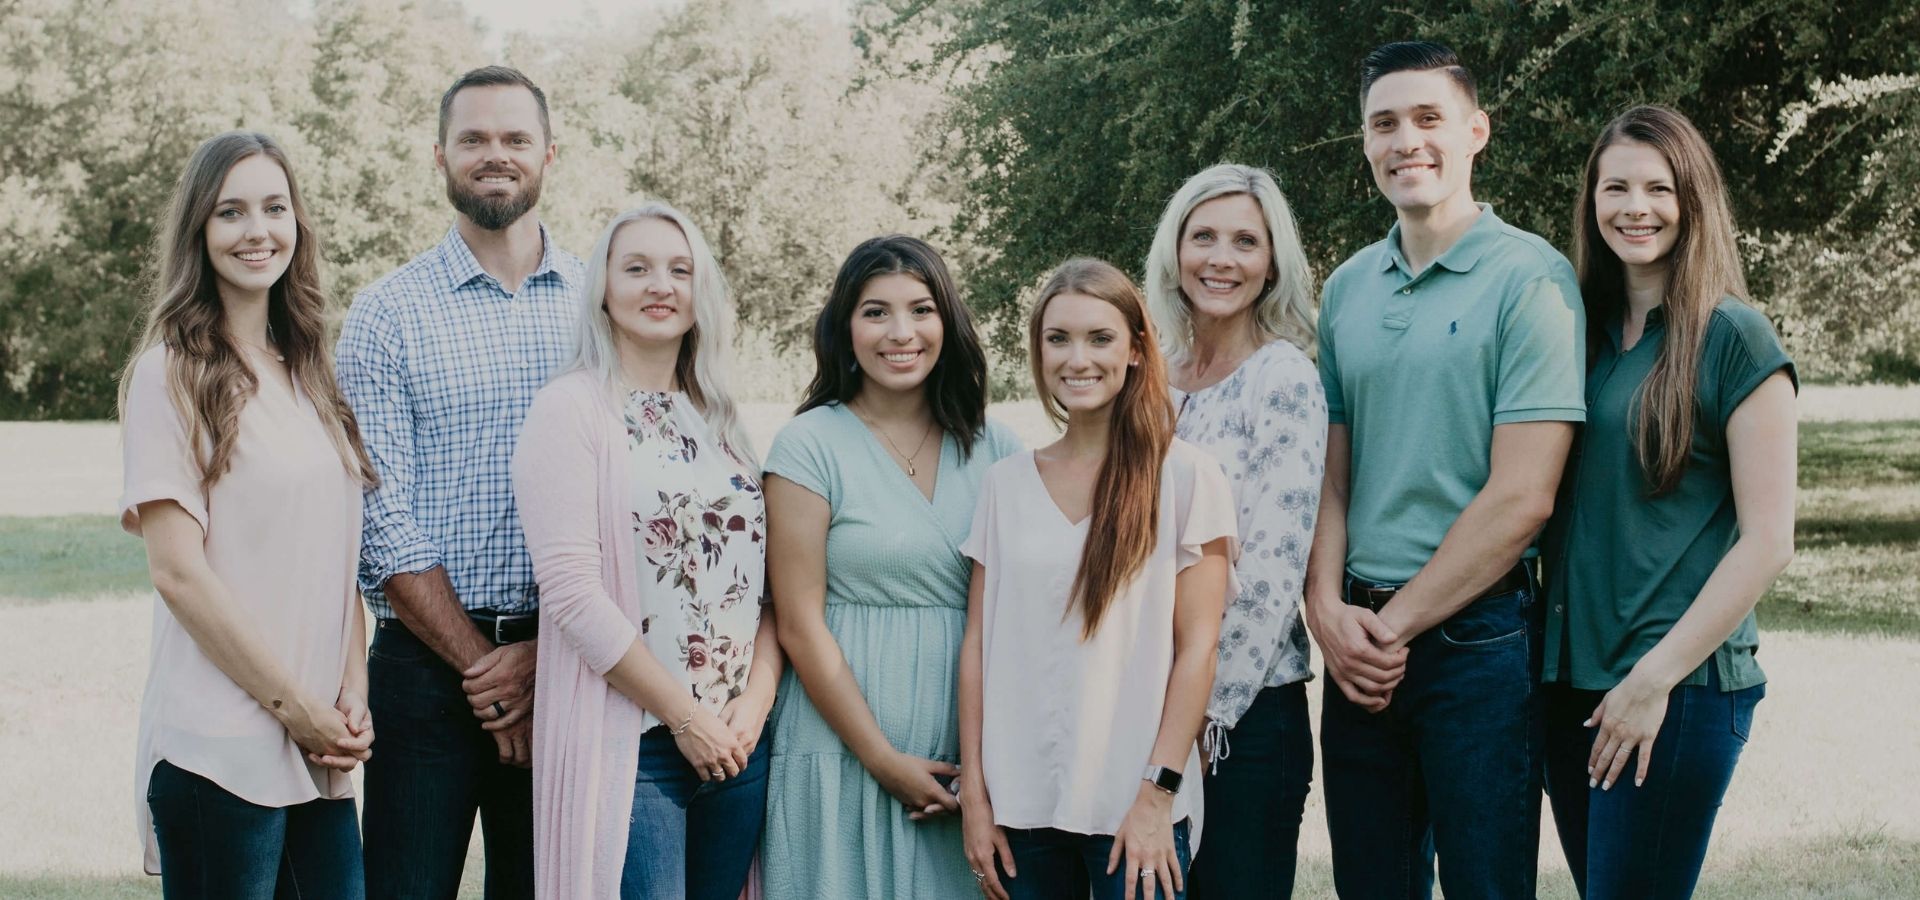 Staff at Impact Family Chiropractic